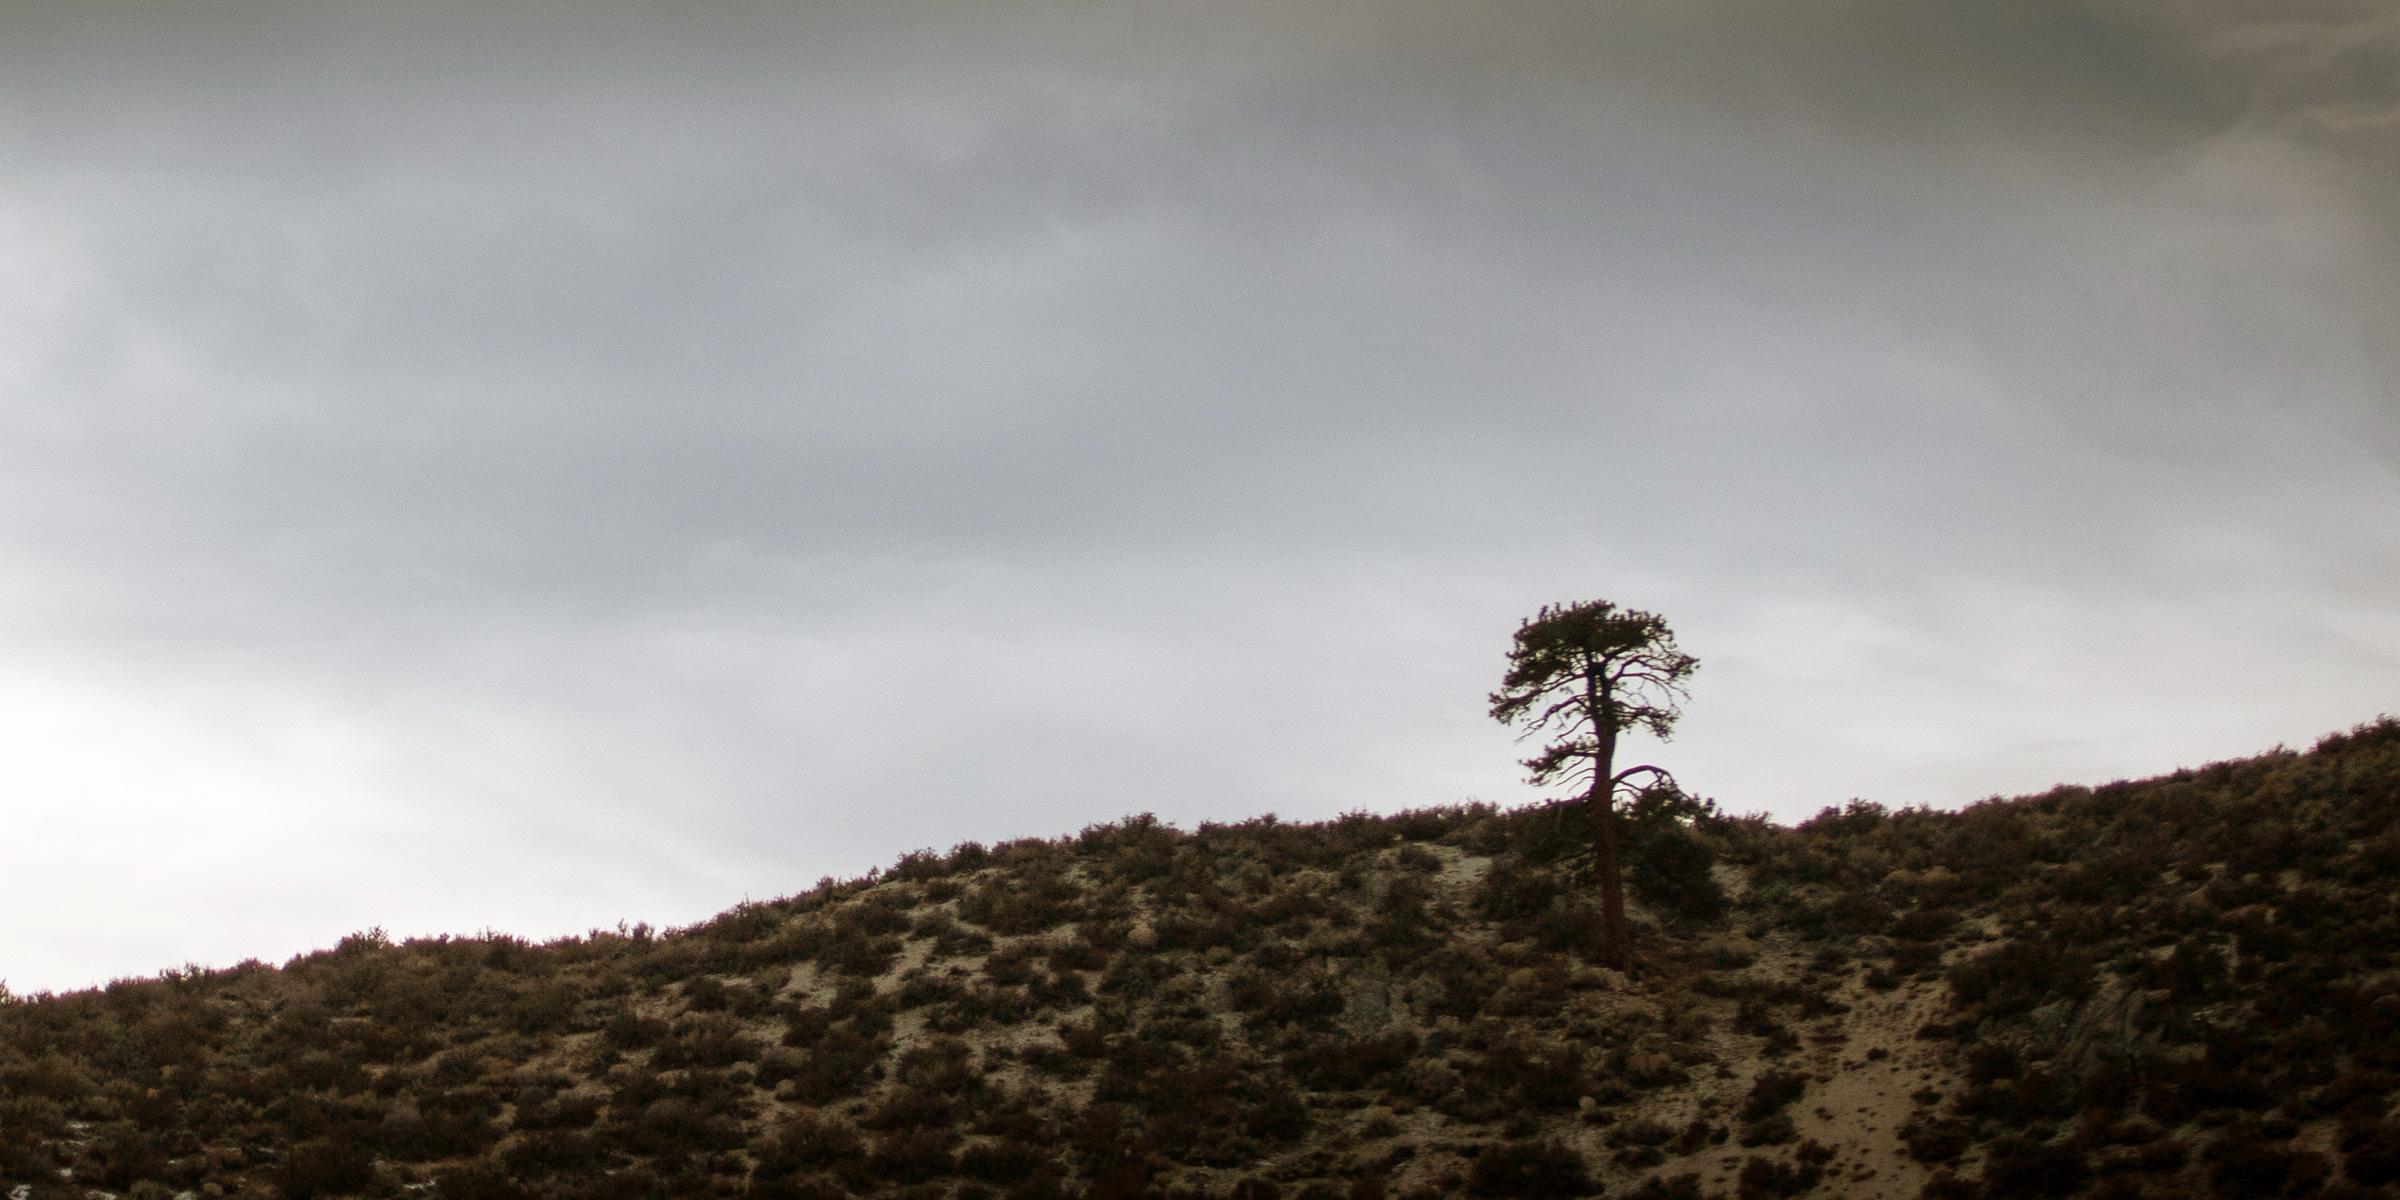 Lone tree growing on hillside with cloudy background